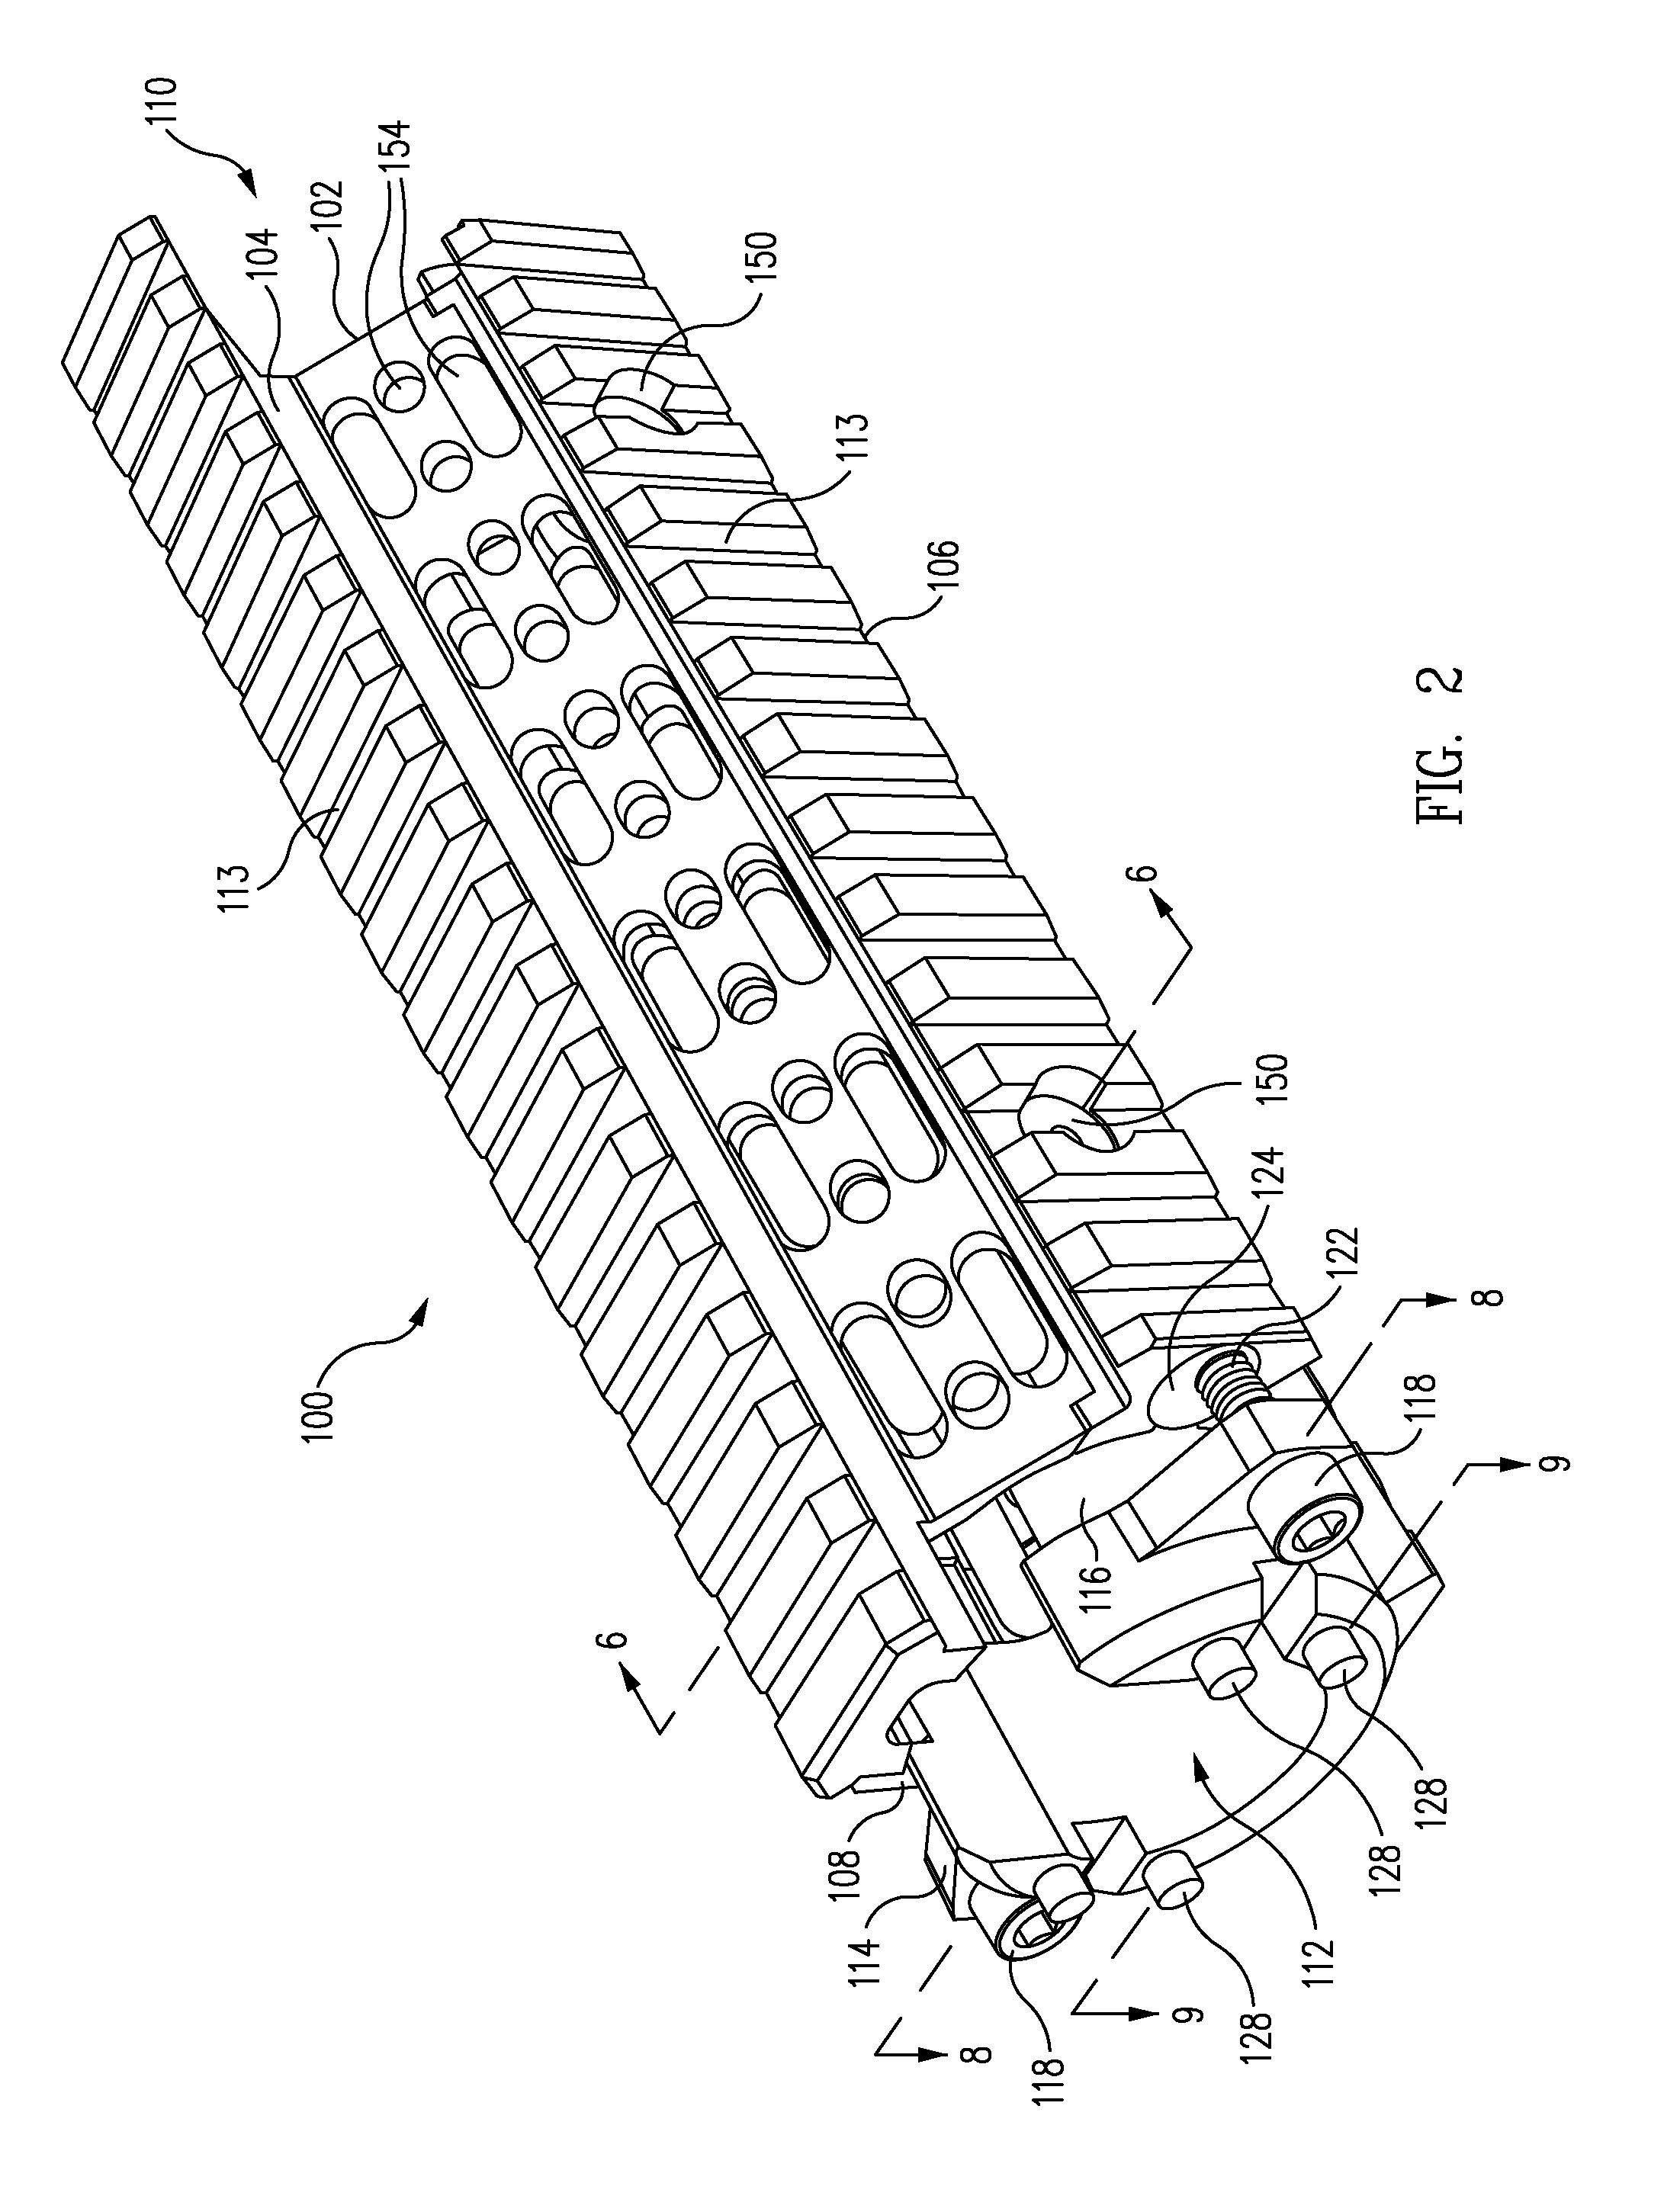 Accessory mounting hand guard for firearm